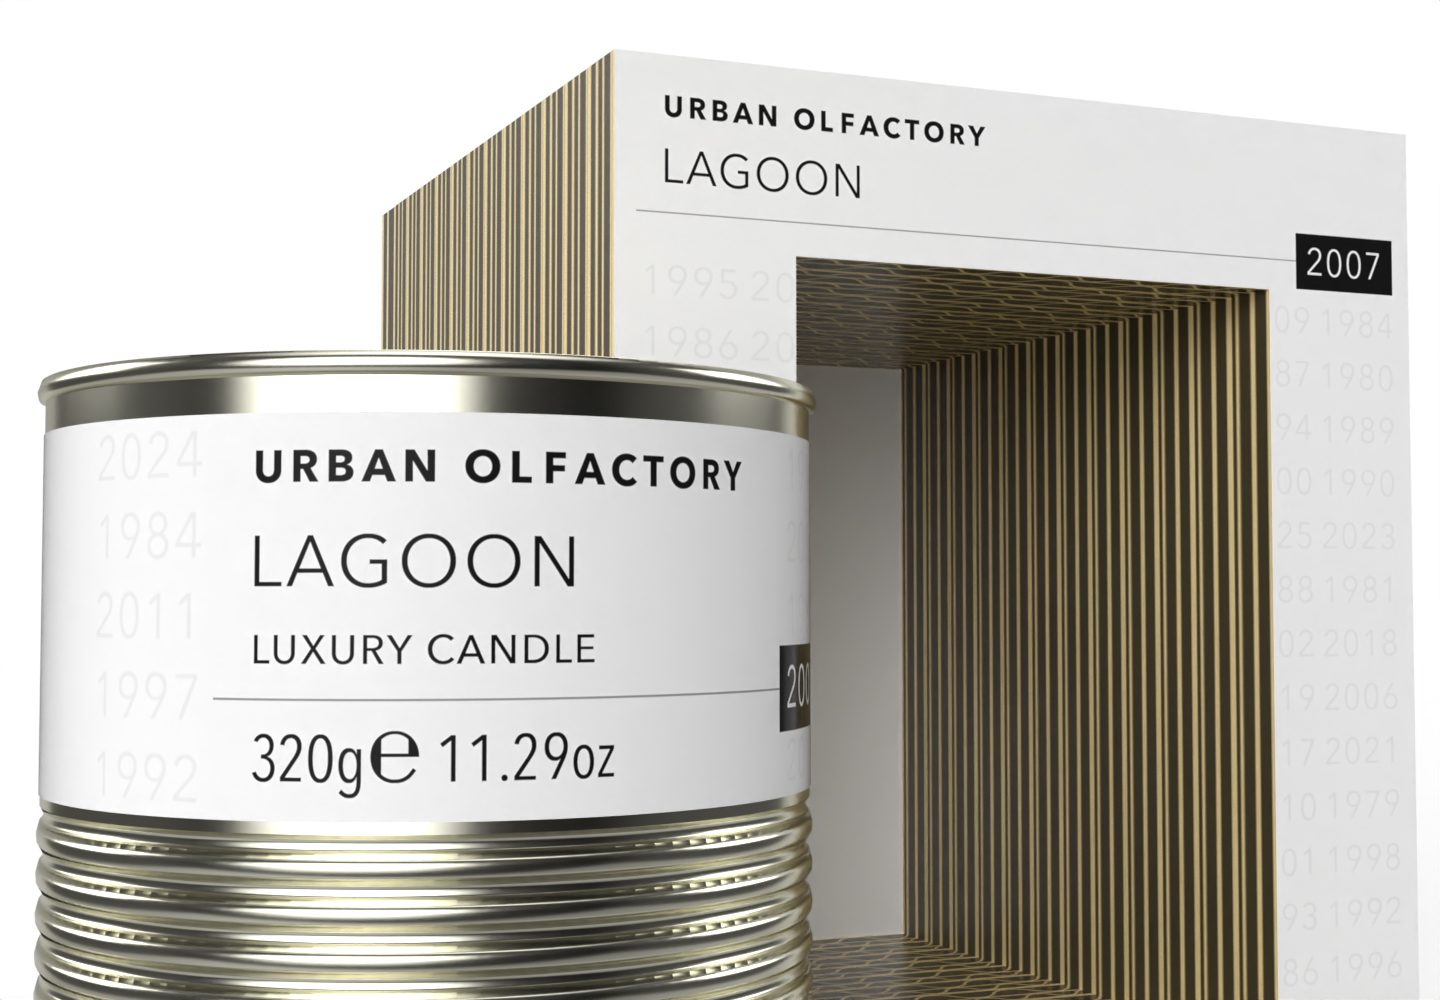 Modern candle packaging graphics design for Urban Olfactory designed by Paul Cartwright Branding.